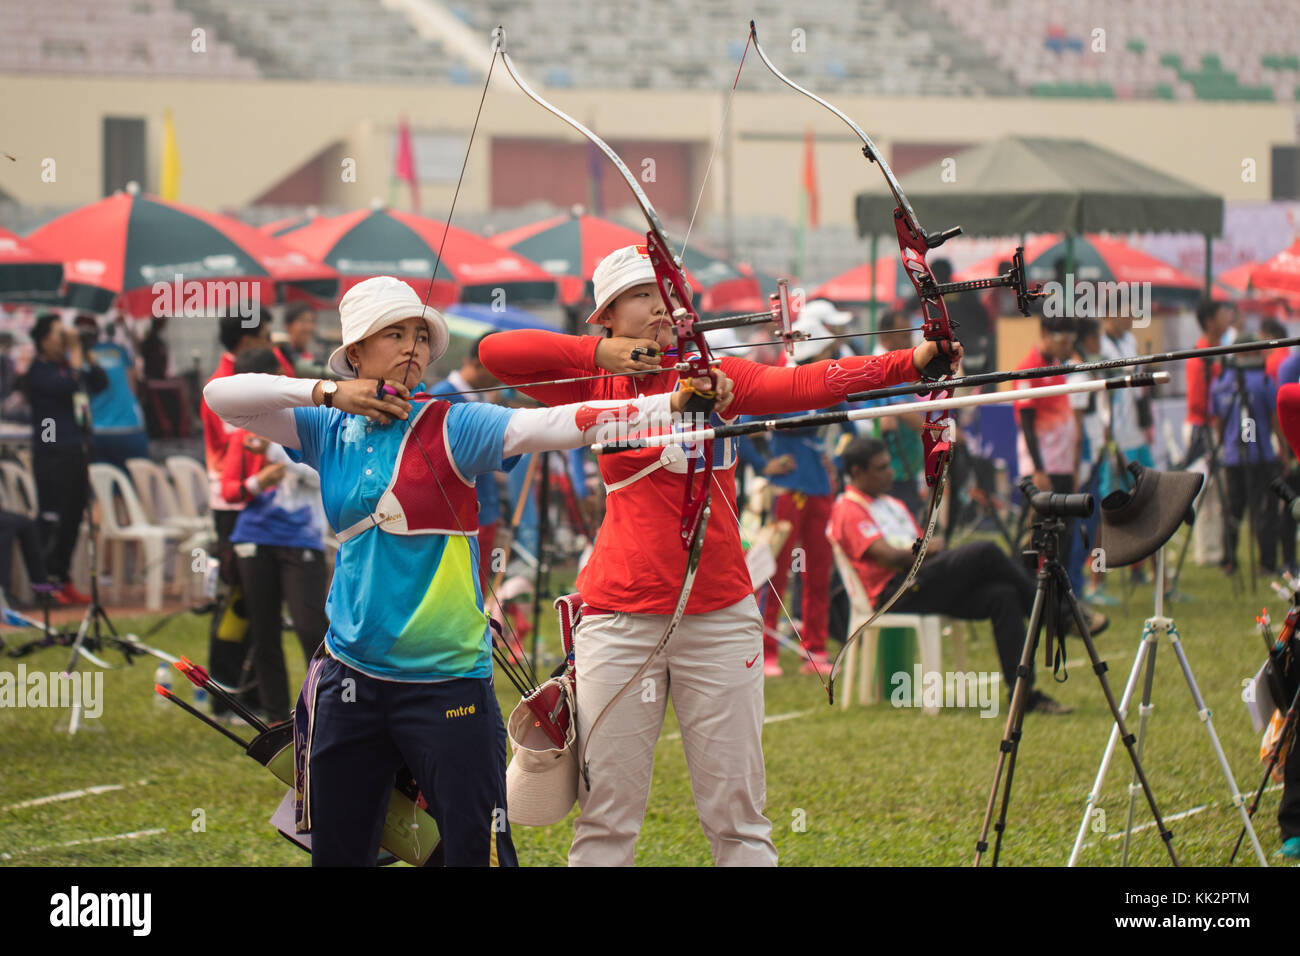 Dhaka, Bangladesh. 28th November 2017. South Korea won the first archery gold medal of the 20th Asian Archery Championship beating India by 157-153 points in the compound mixed team event final held on Tuesday at Bangabandhu National Stadium, Dhaka, Bangladesh. A total of 33 countries are competing for the 10 gold medals in the championships. The 20th Asian Archery Championship 2017, begins Dhaka, Bangladesh on Saturday (November 25) for the first time in Bangladesh under the auspices of Bangladesh Archery Federation (BAF) and World Archery Asia (WAA). Azim Khan Ronnie/Alamy Live News Stock Photo